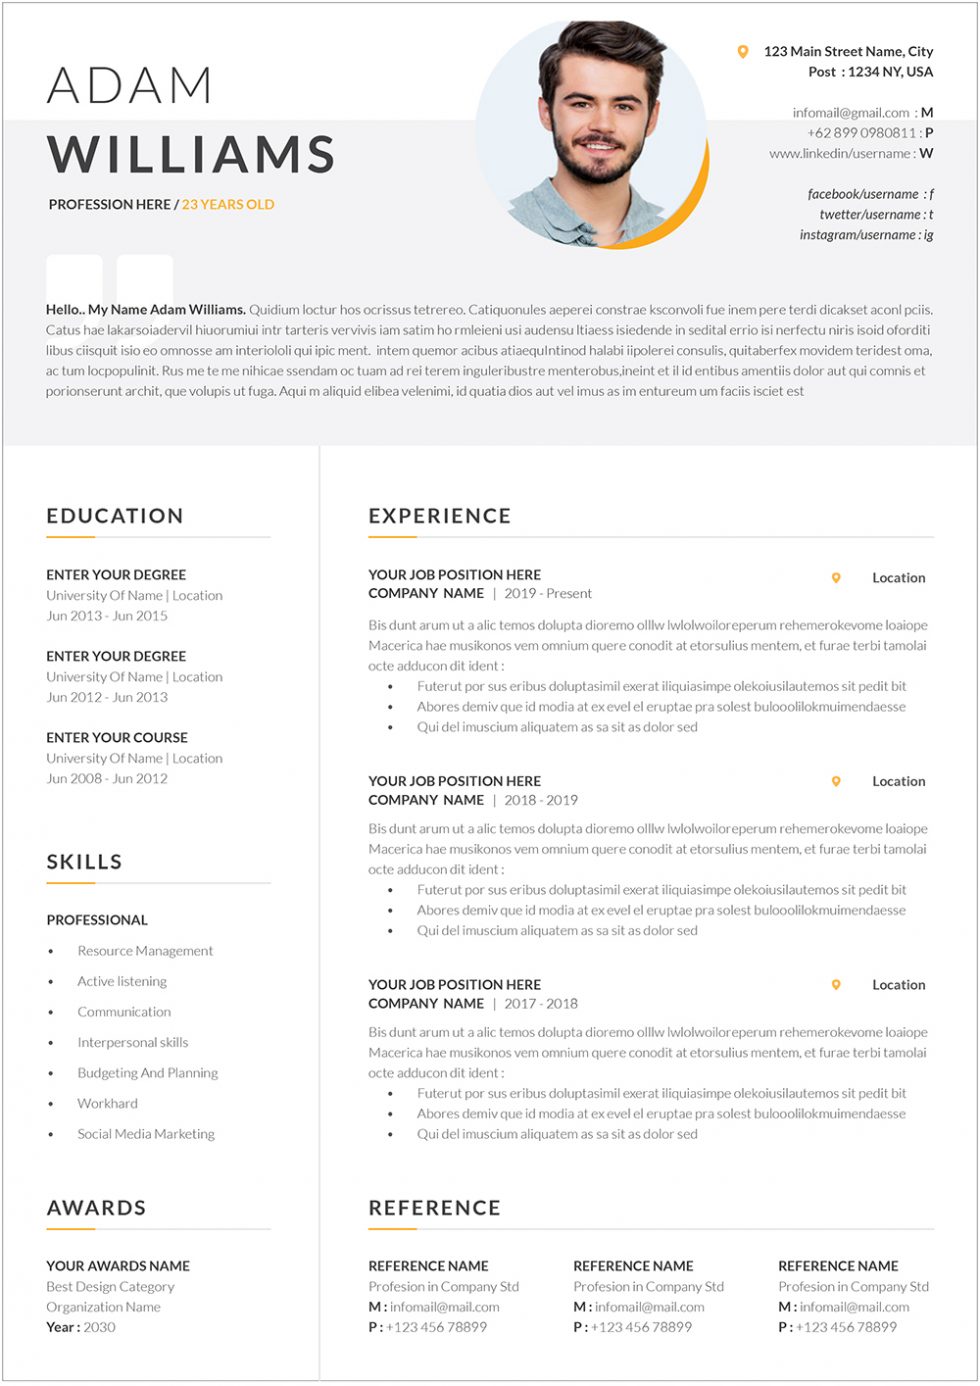 Example CV Organized Format Word to Download | Resume Organized